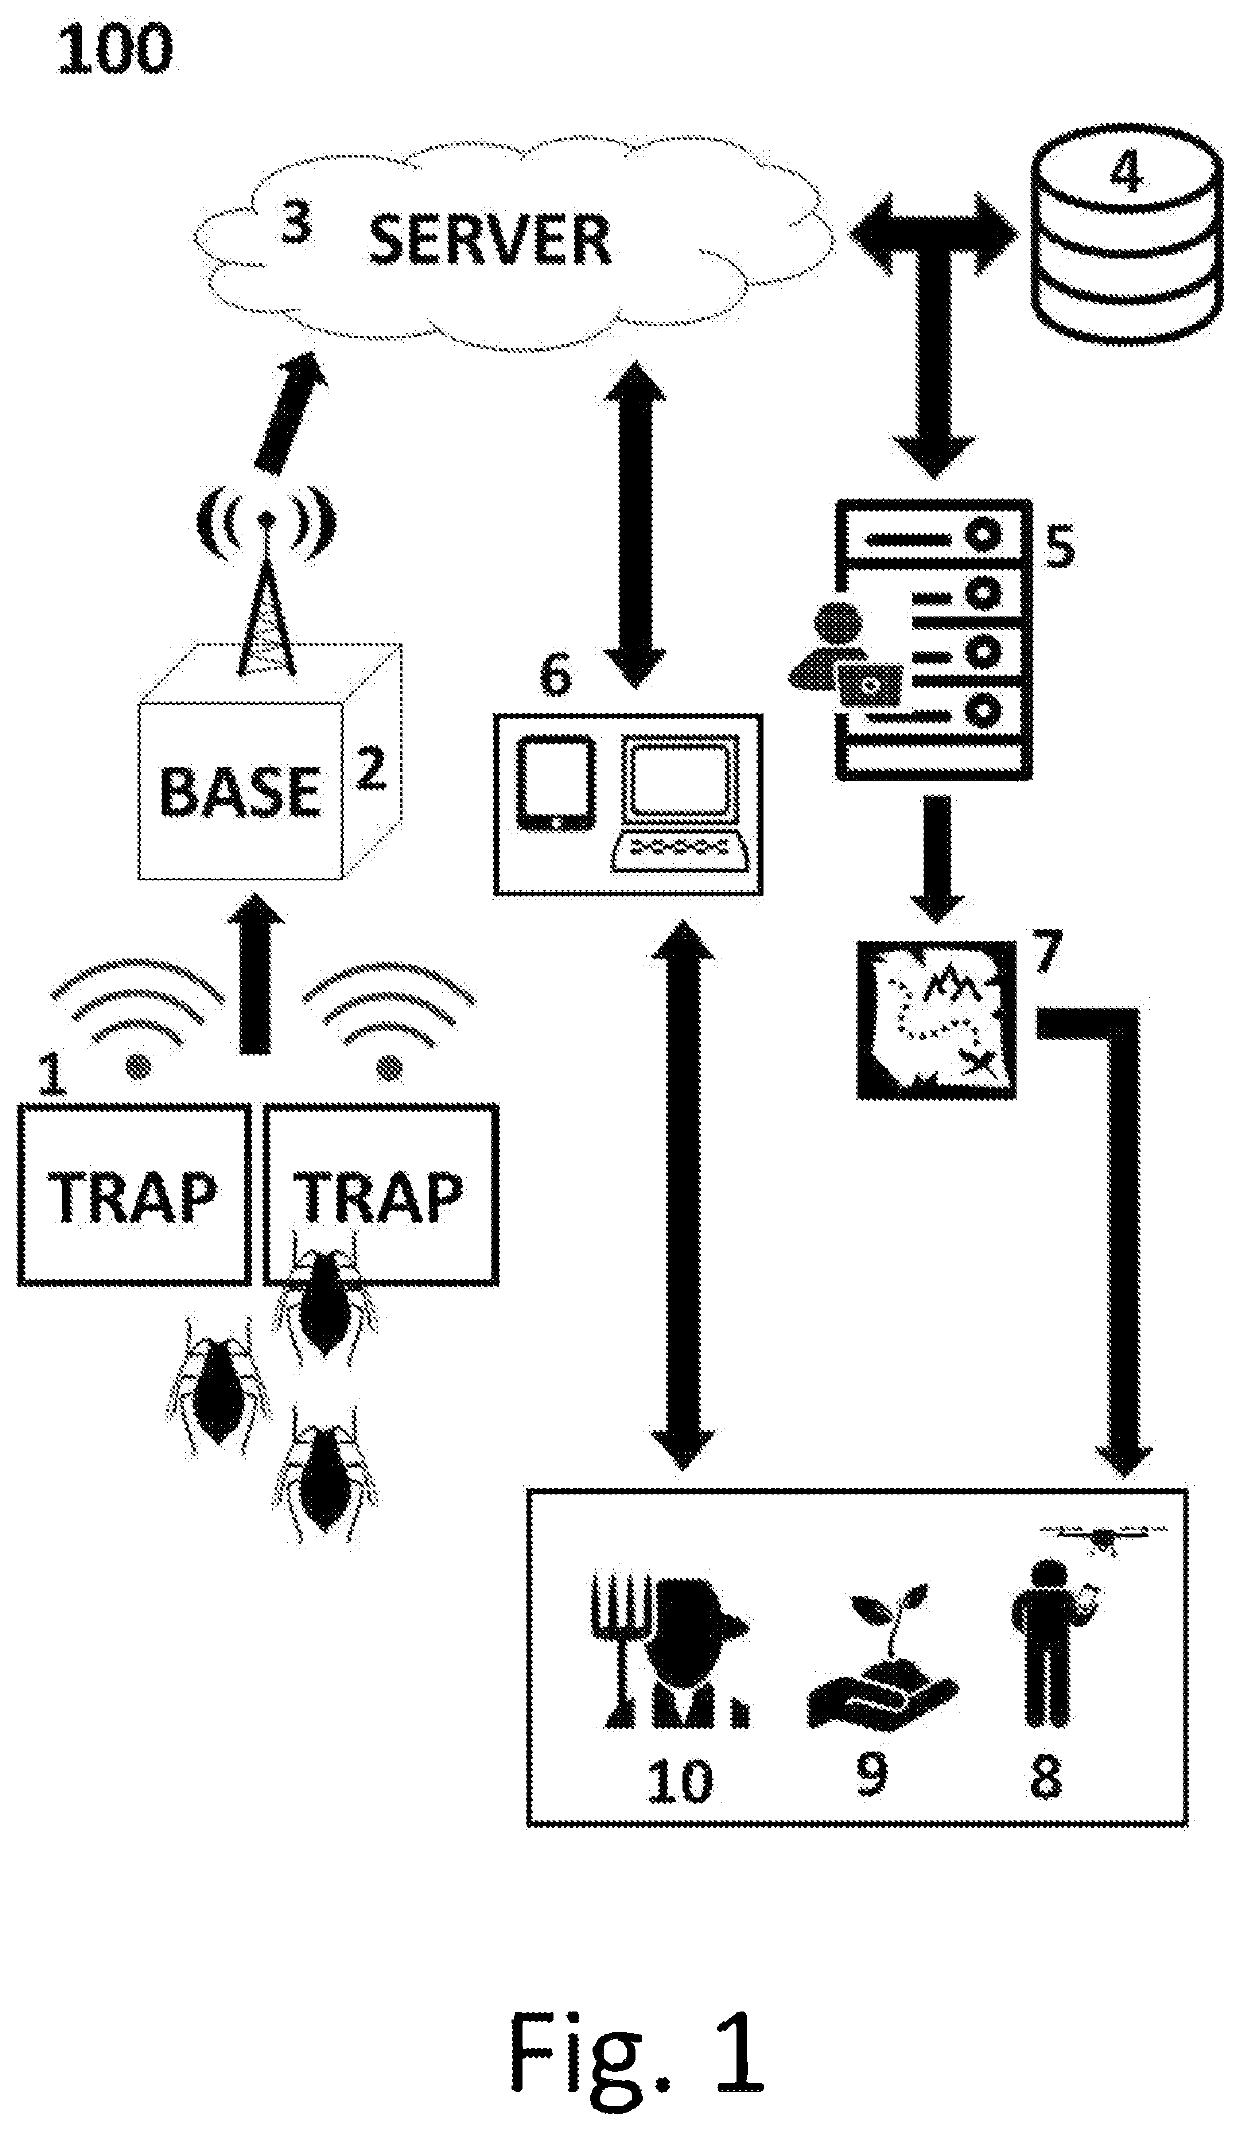 Integrated system for controlling, detecting, monitoring, evaluating and treating crop pests